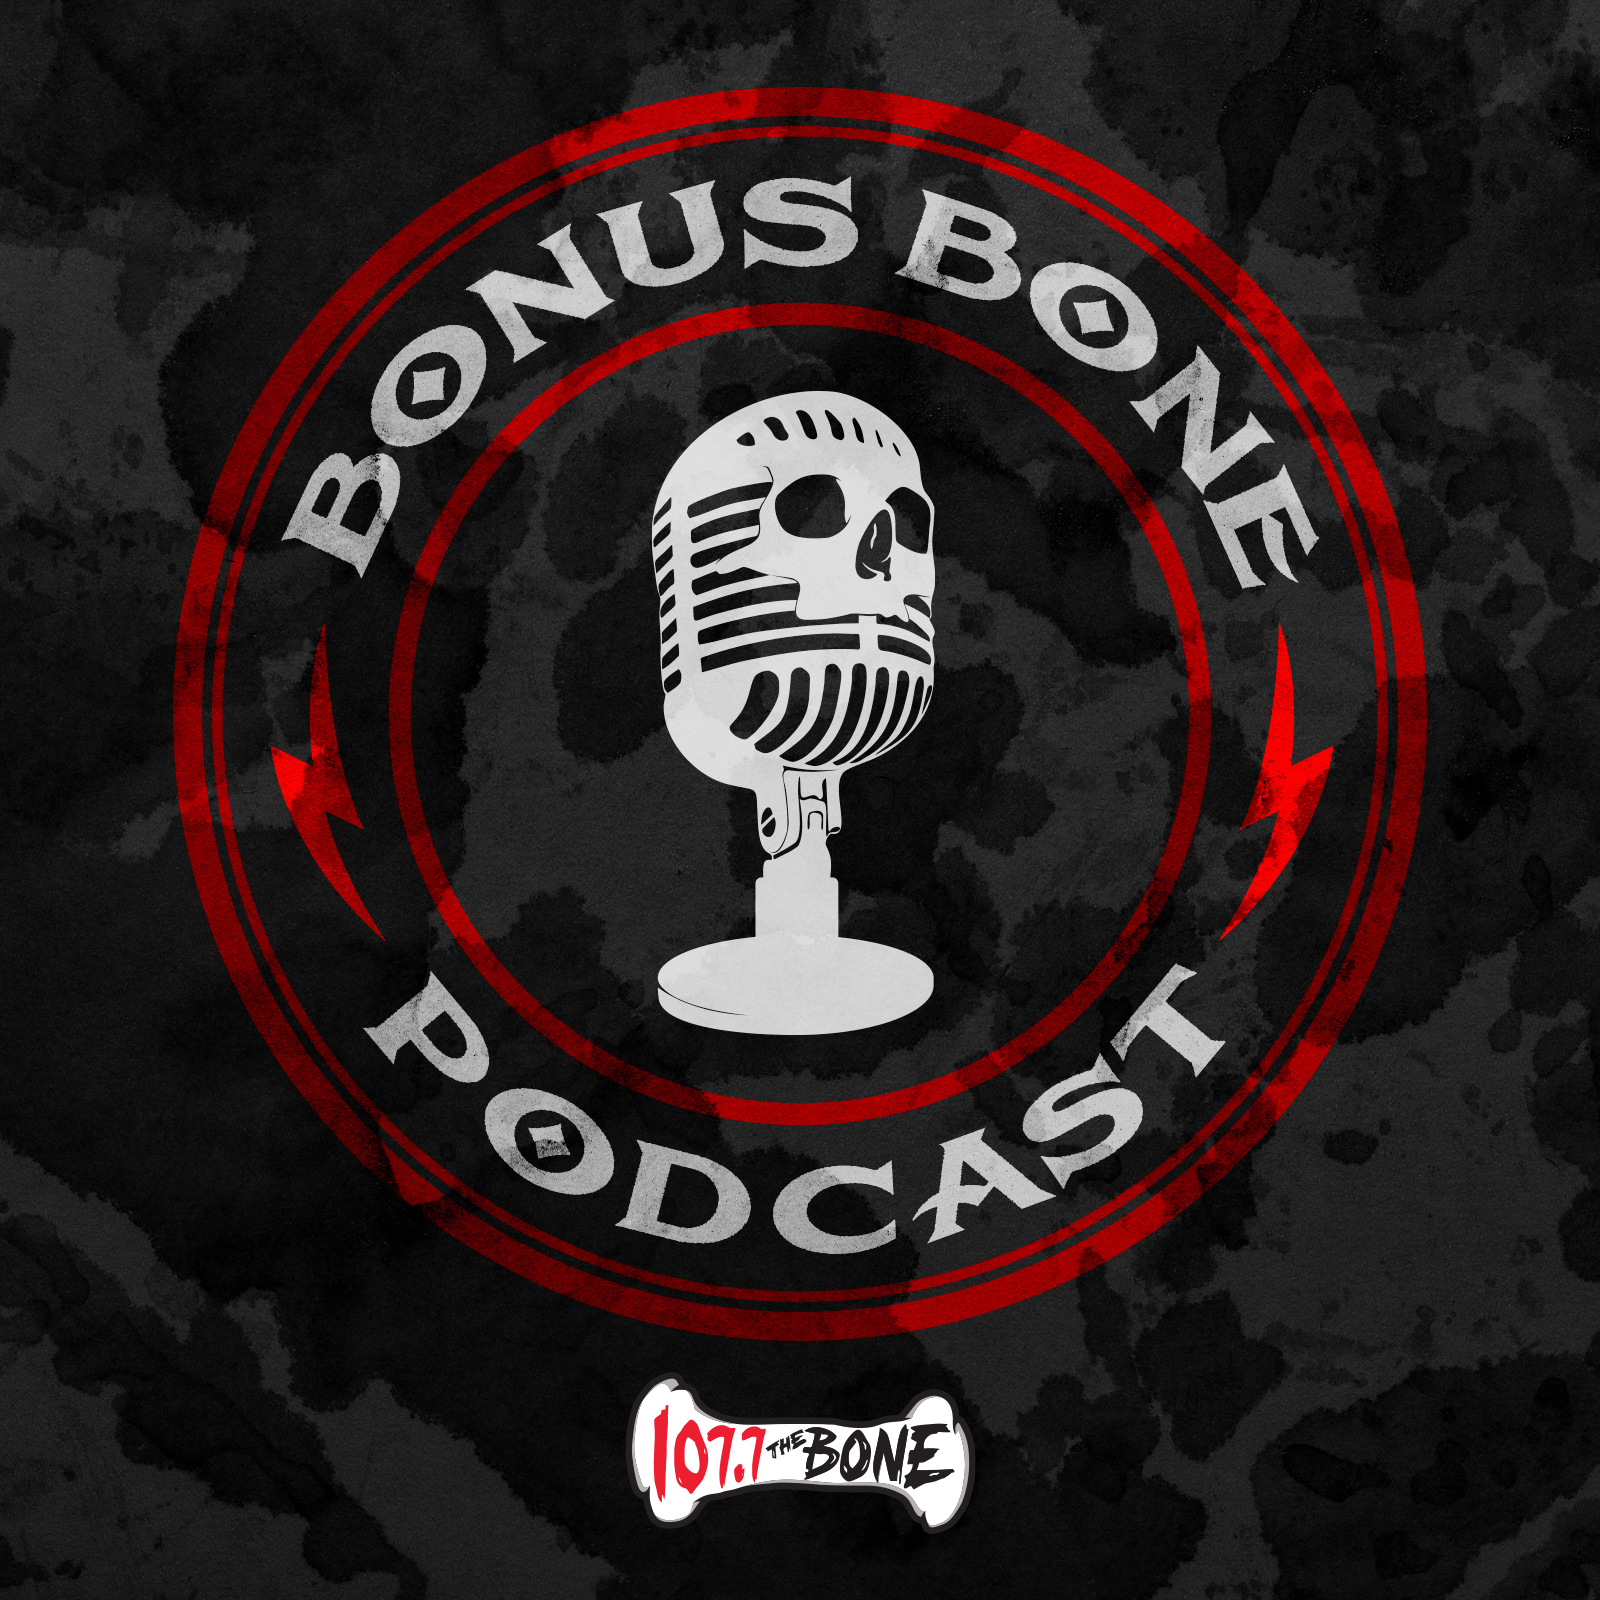 The Bonus Bone: Have You Ever Put Your Foot In Your Mouth?